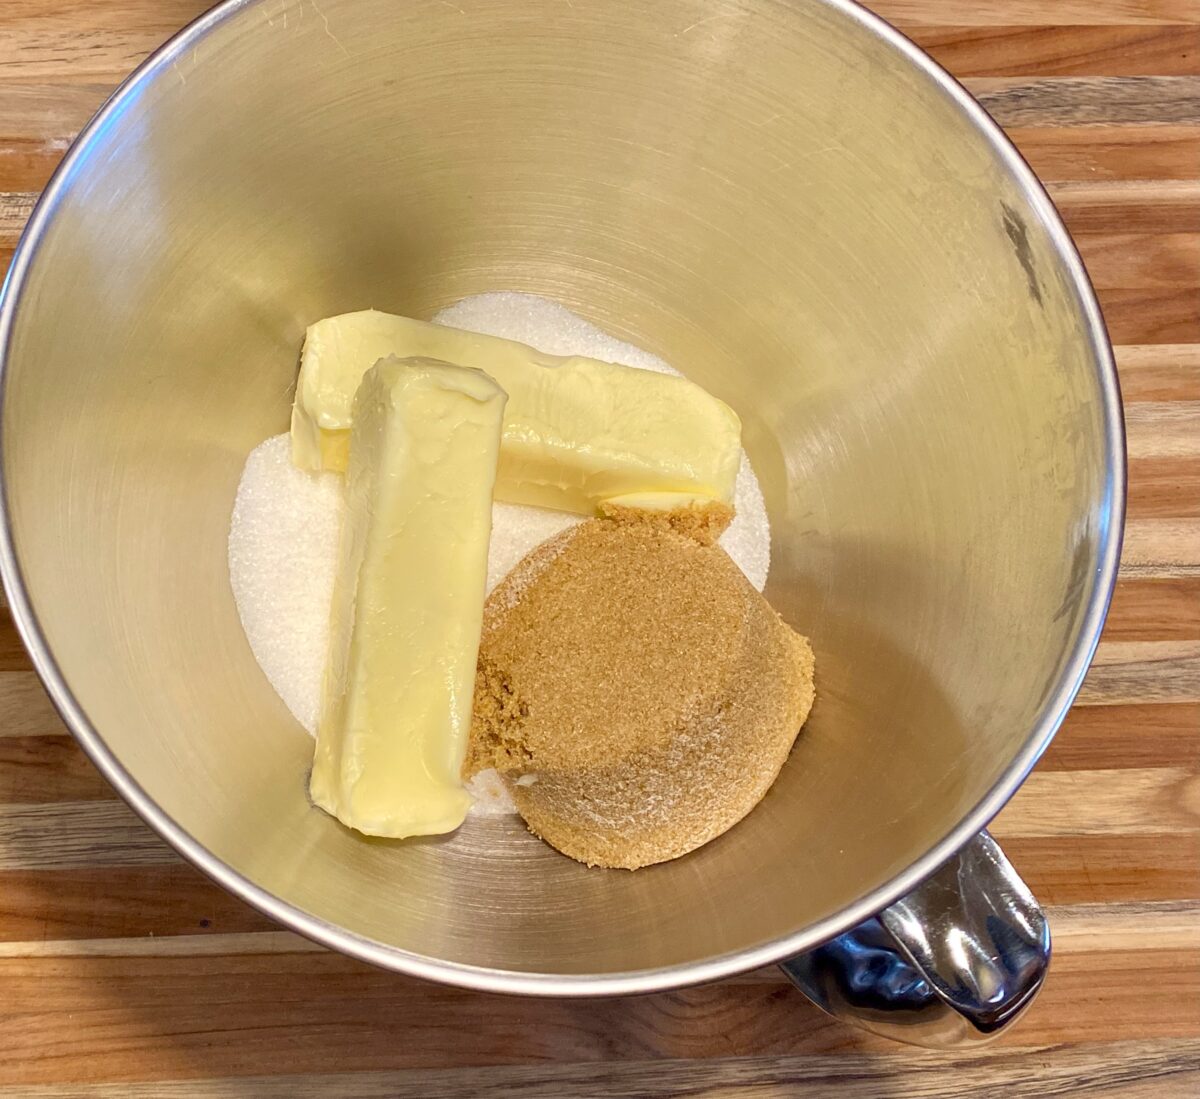 Butters and sugar in the bowl of a stand mixer.